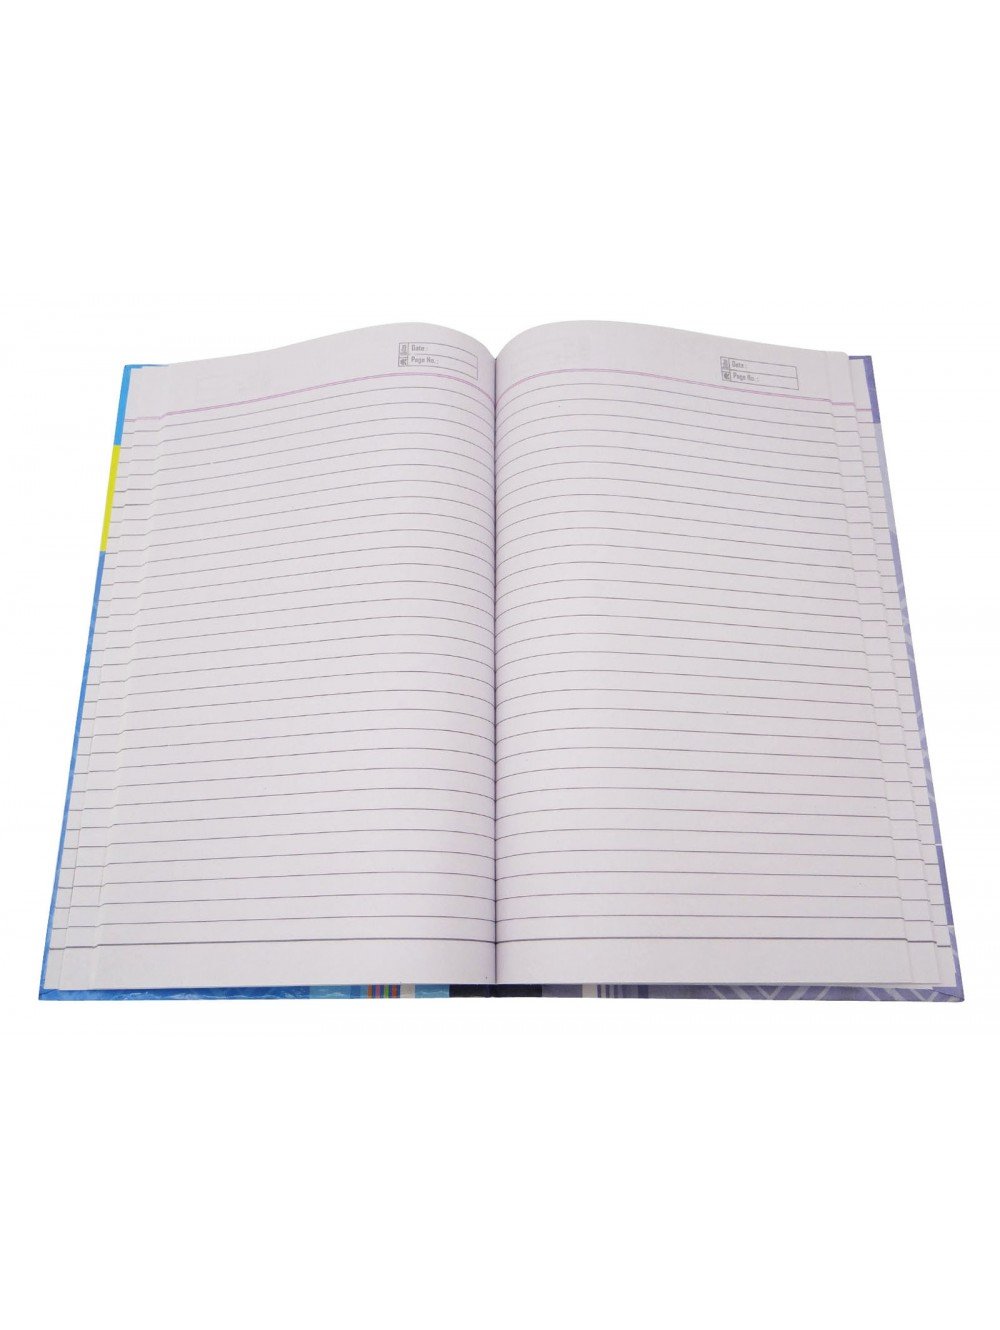 200 pages long notebook